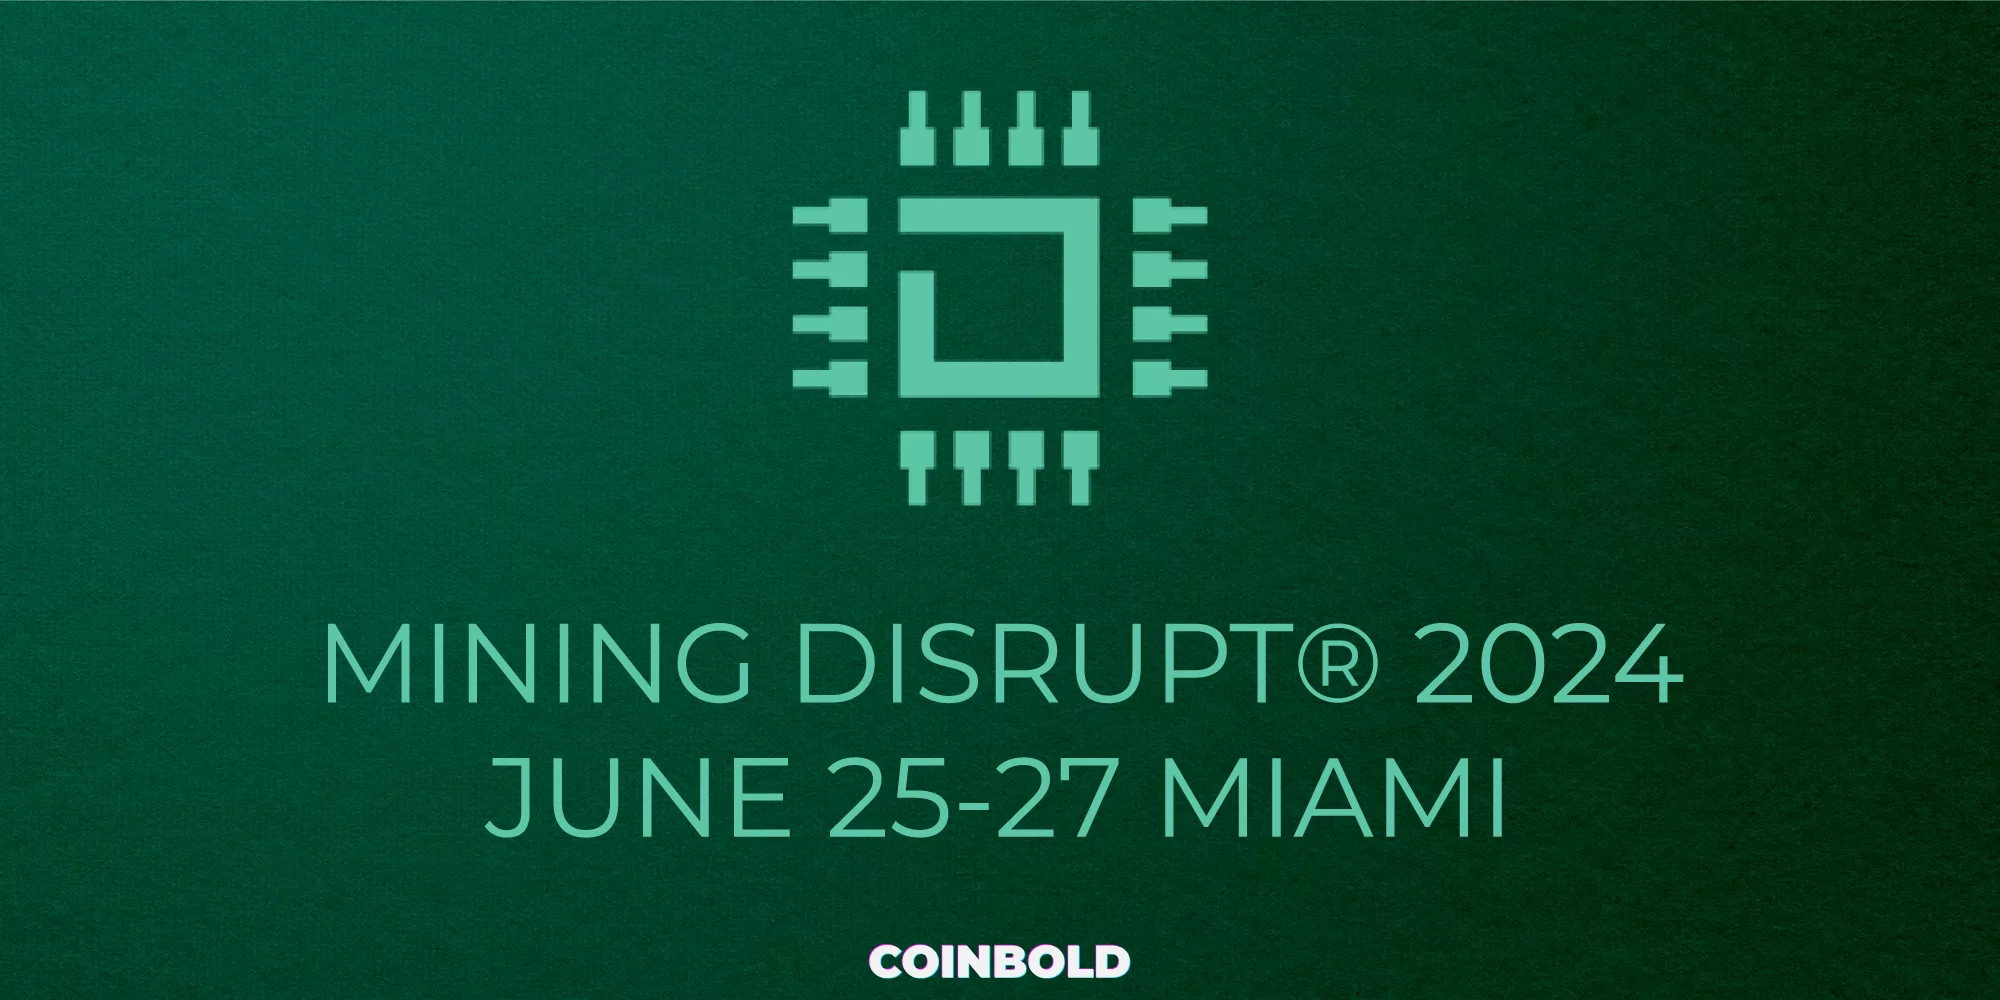 Mining Disrupt Conference 2024 Coinbold